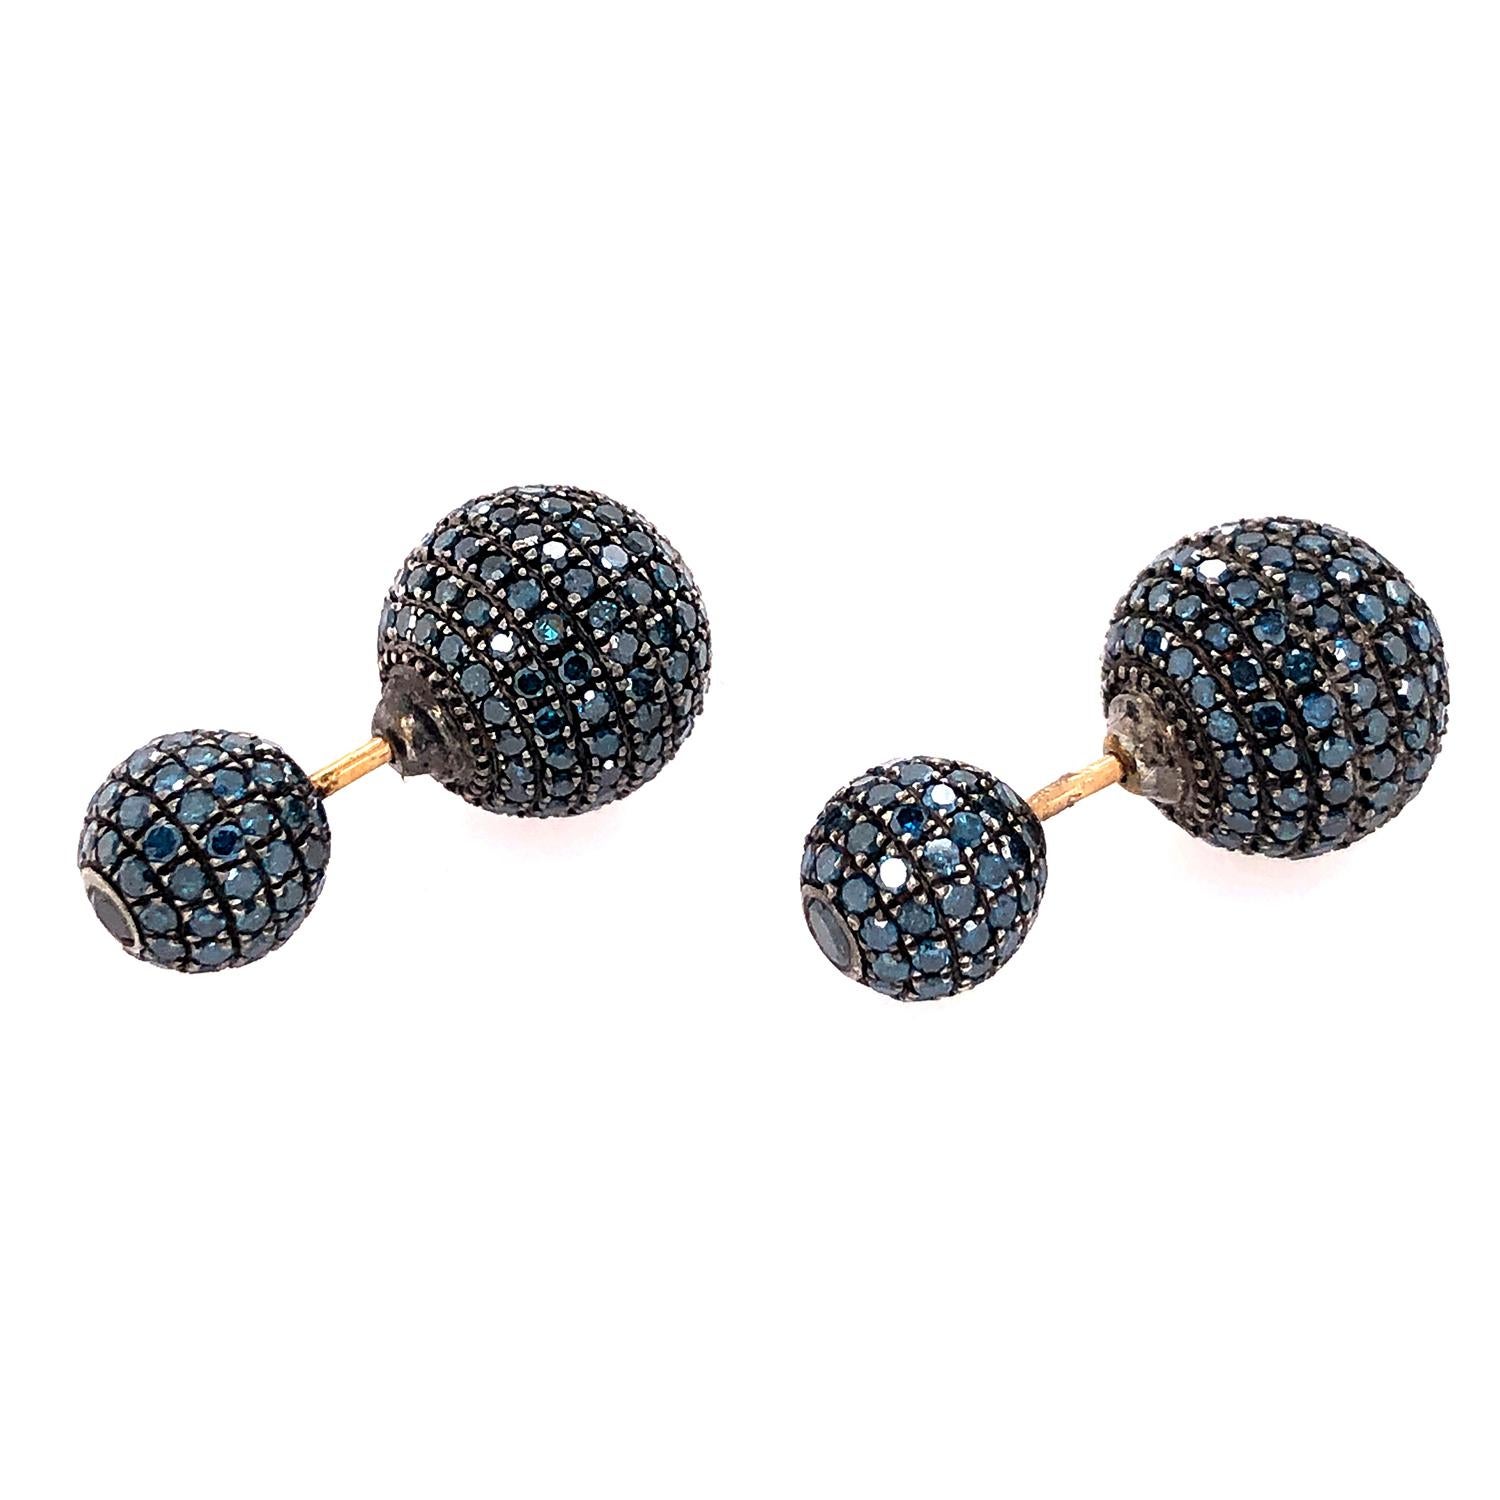 These blue pave diamond ball earrings are made of 18k gold and silver, combining two precious metals in a stunning and unique design. The earrings feature a round ball shape, encrusted with sparkling blue diamonds in a pave setting. The diamonds add